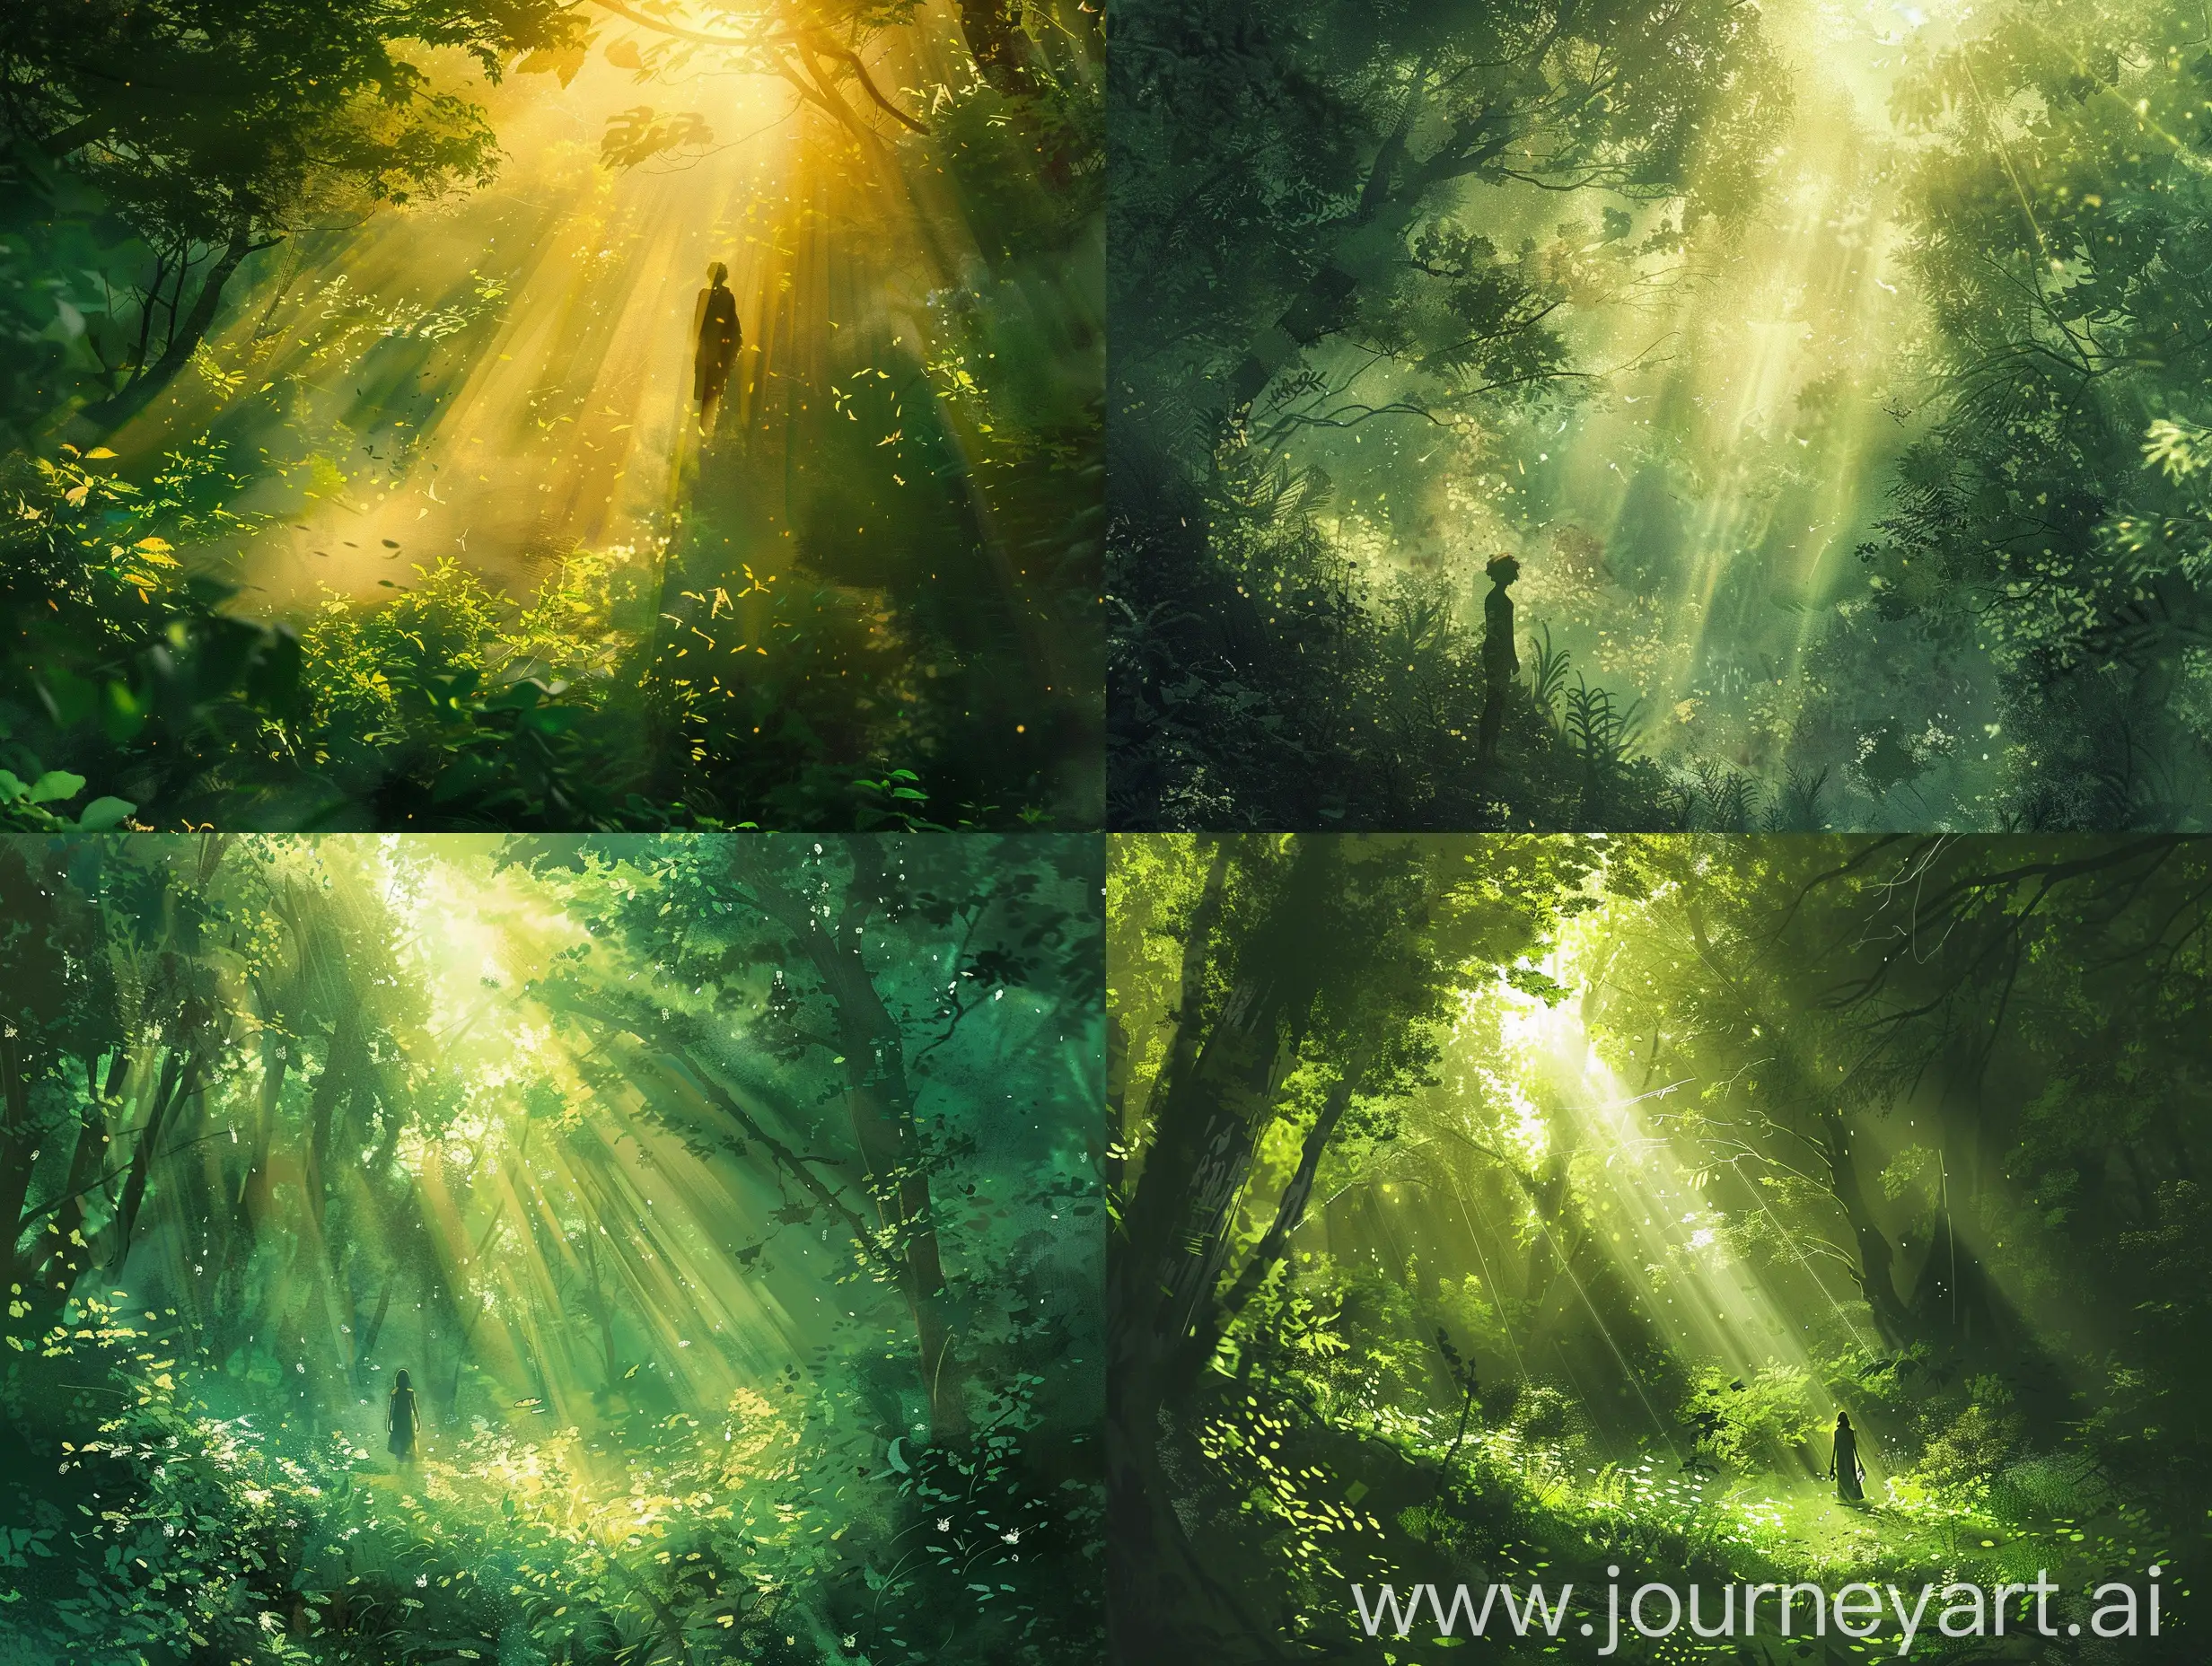 Person-in-Tranquil-Forest-Undergrowth-Bathed-in-Sunlight